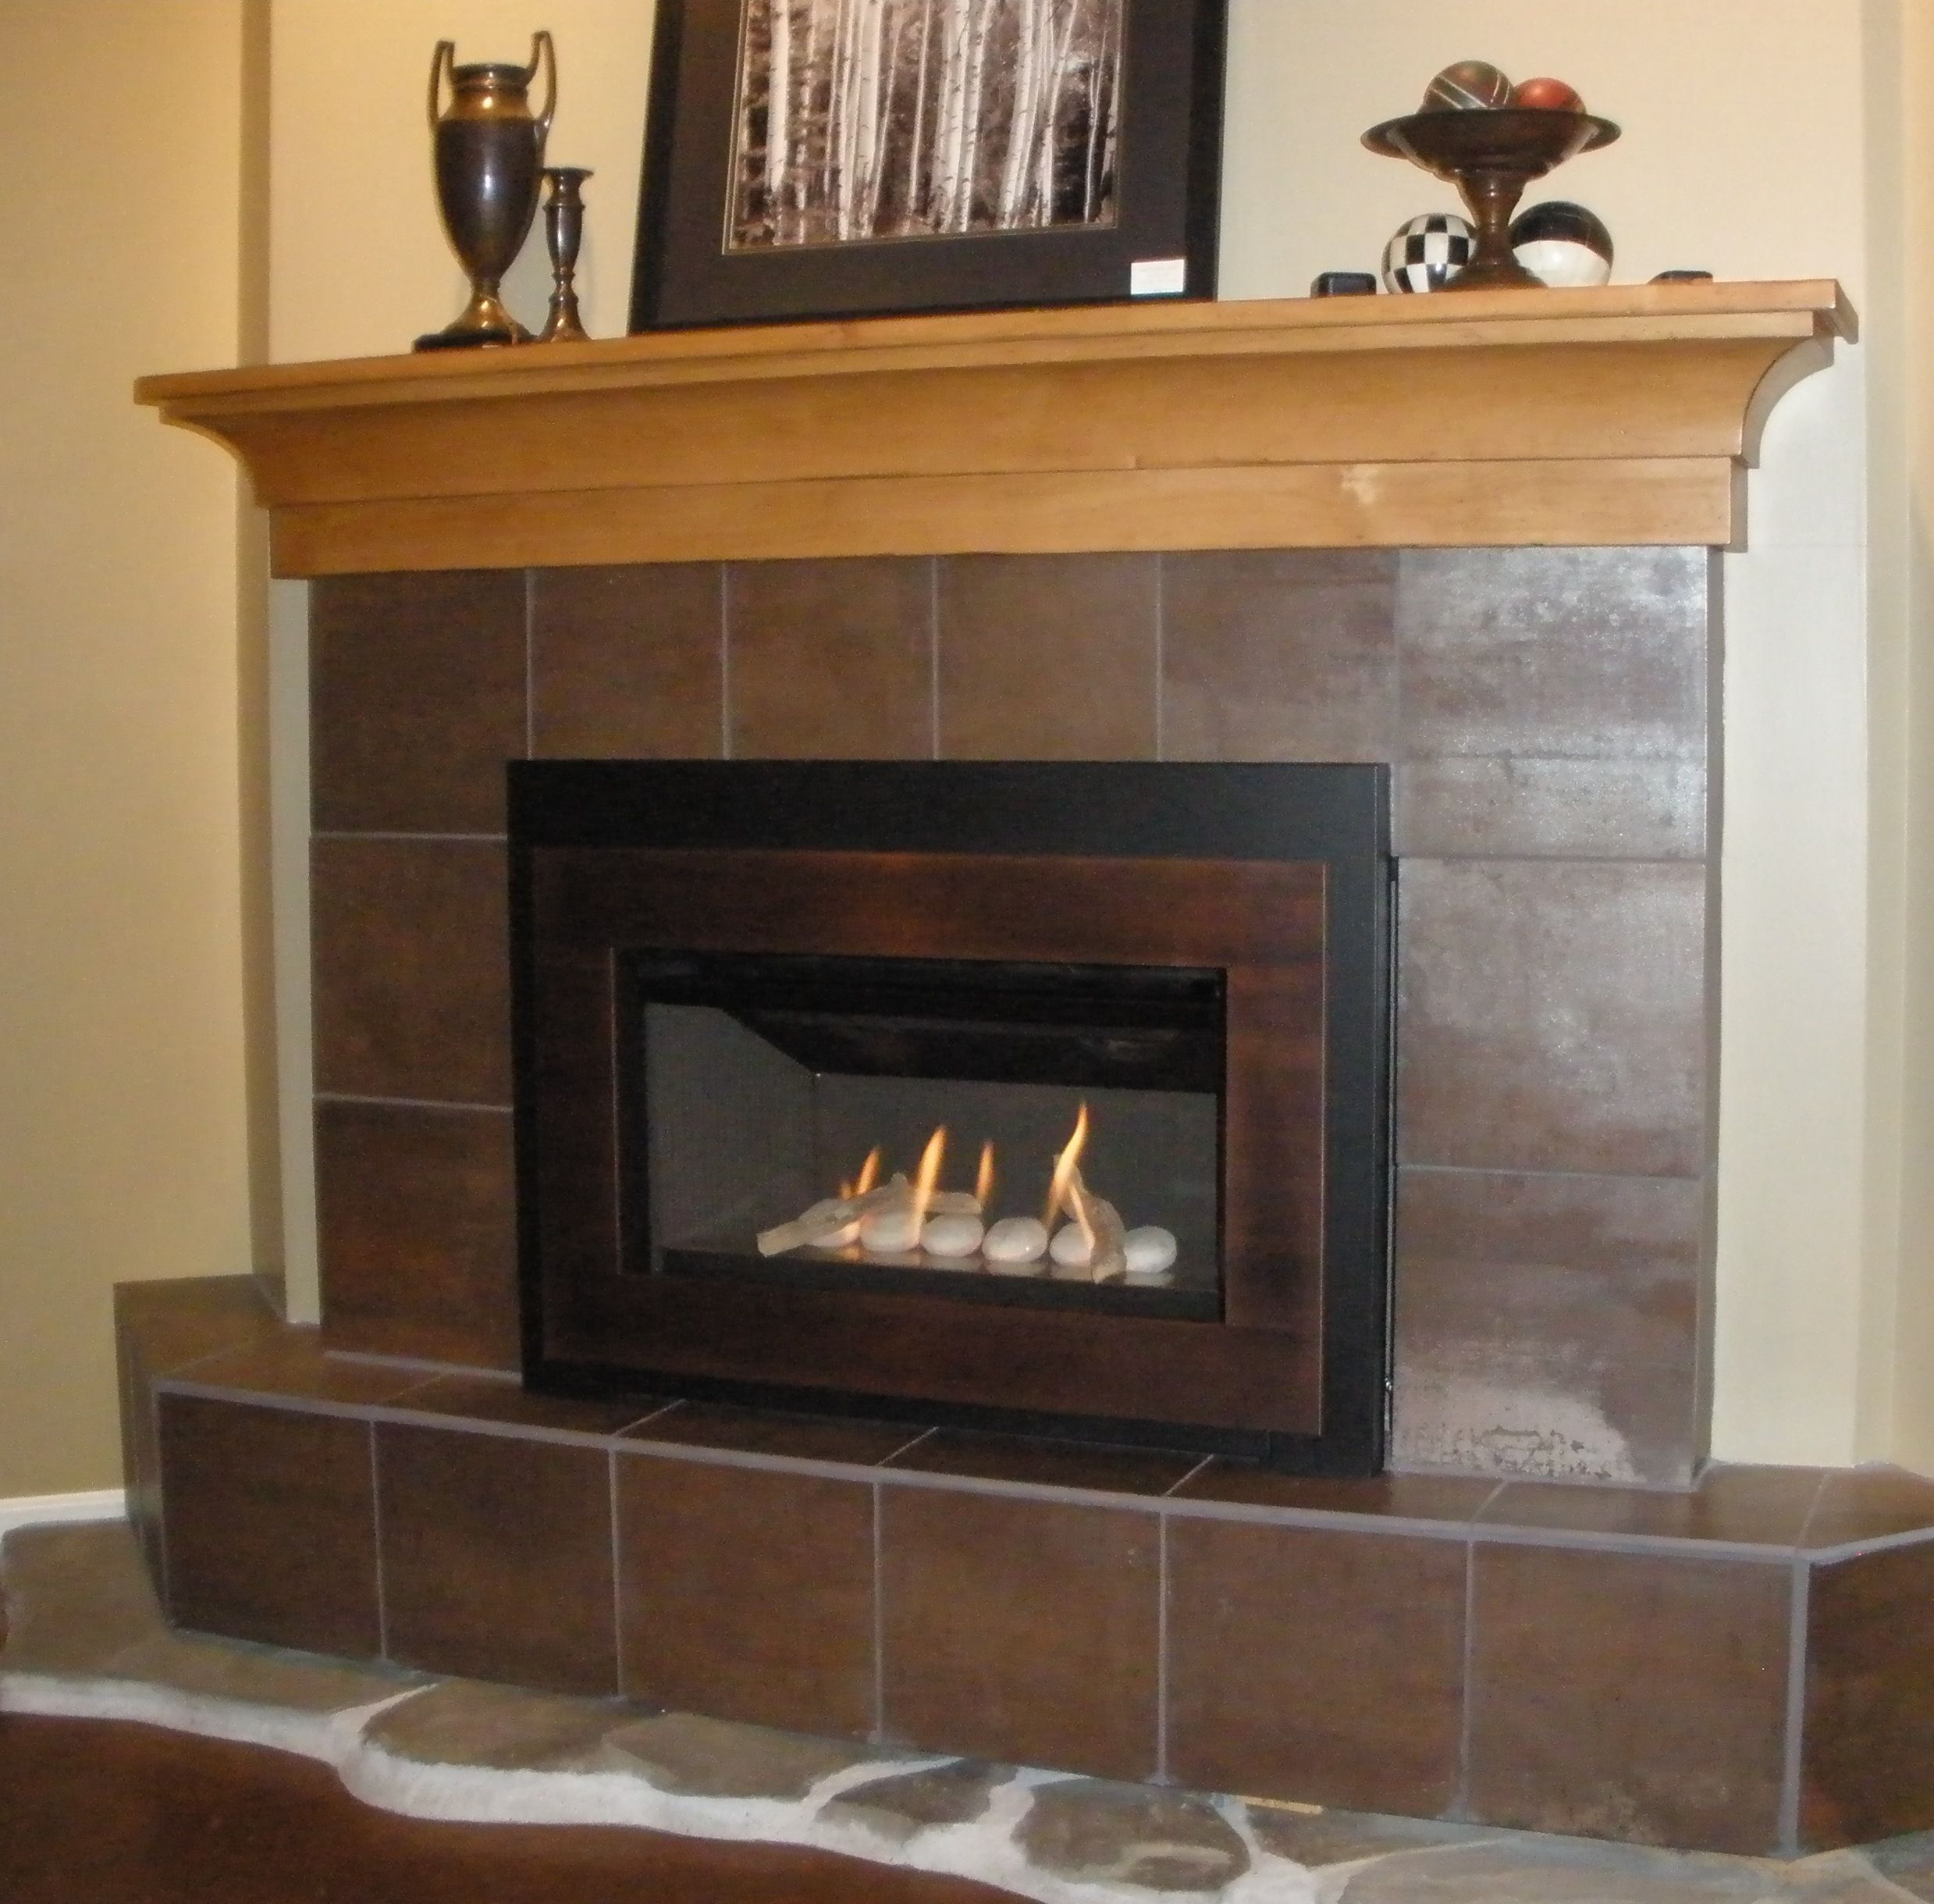 Custom Gas Fireplaces Luxury Pin On Valor Radiant Gas Fireplaces Midwest Dealer